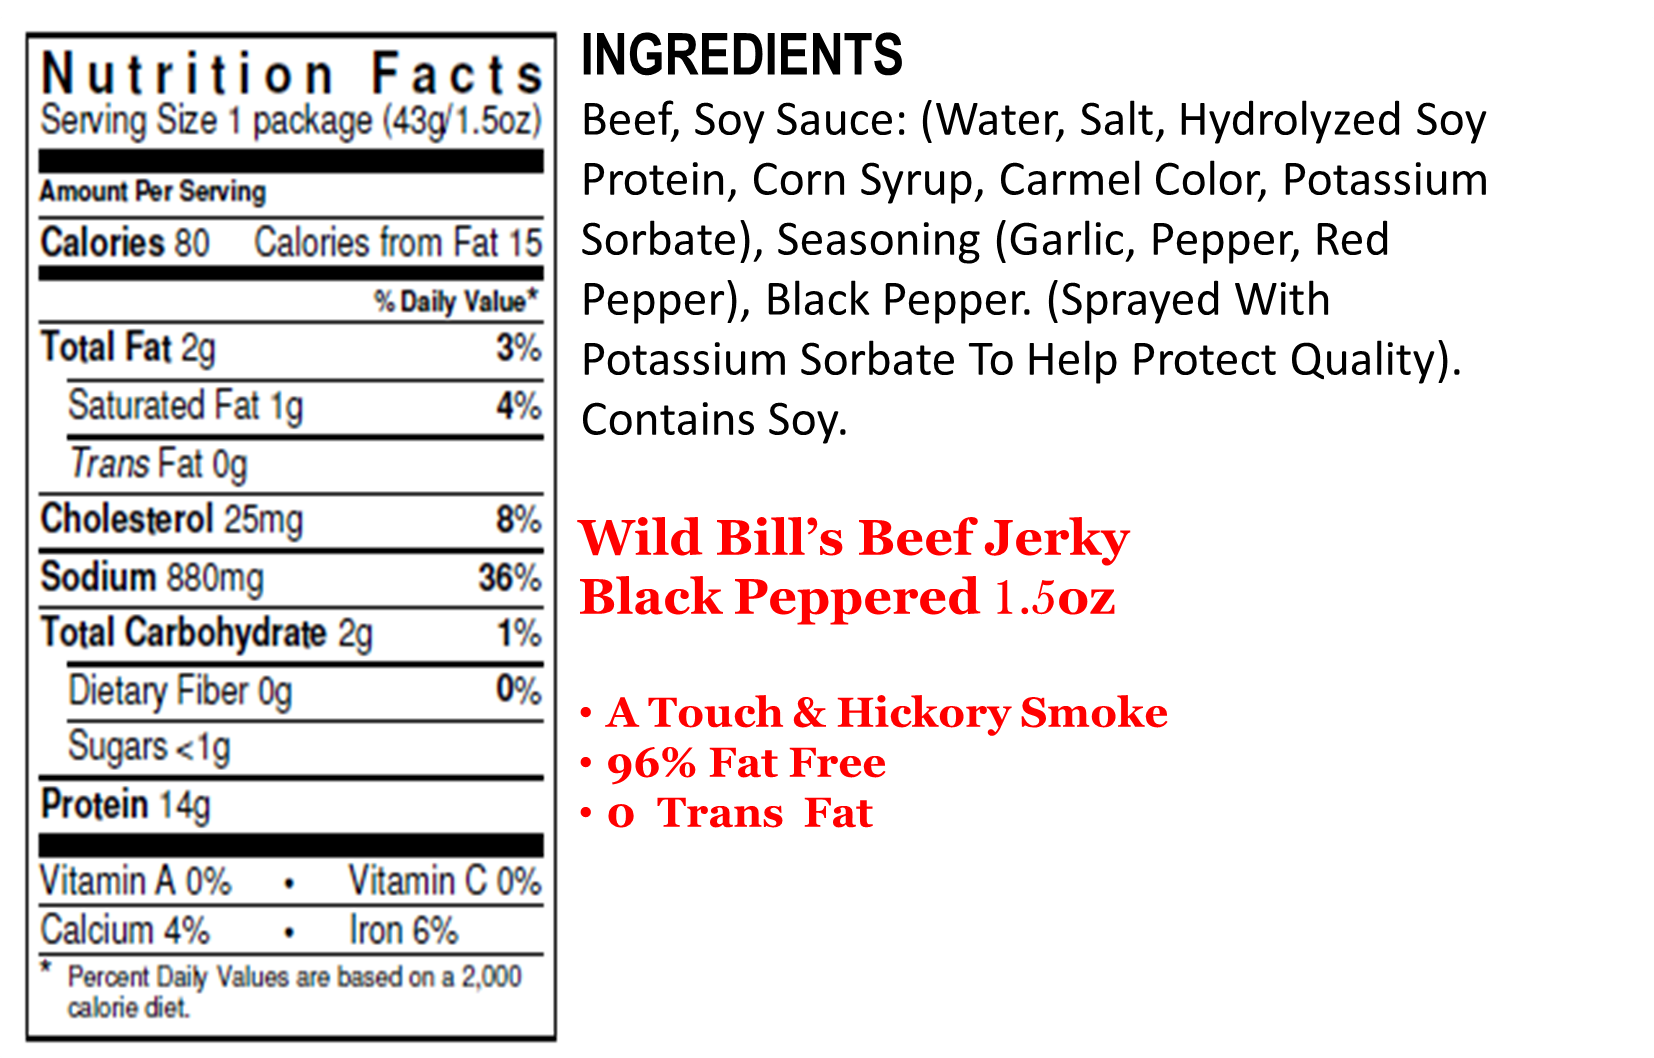 Get Great Taste and in a a Get It To Go Bag! 1.5 ounce bags of Hickory Smoked Beef Jerky satisfies the crave every time.  Designed to fit just perfect in the backpocket, purse, backpack, saddlebag or car!  WILD BILL SAYS SO! Ingredients